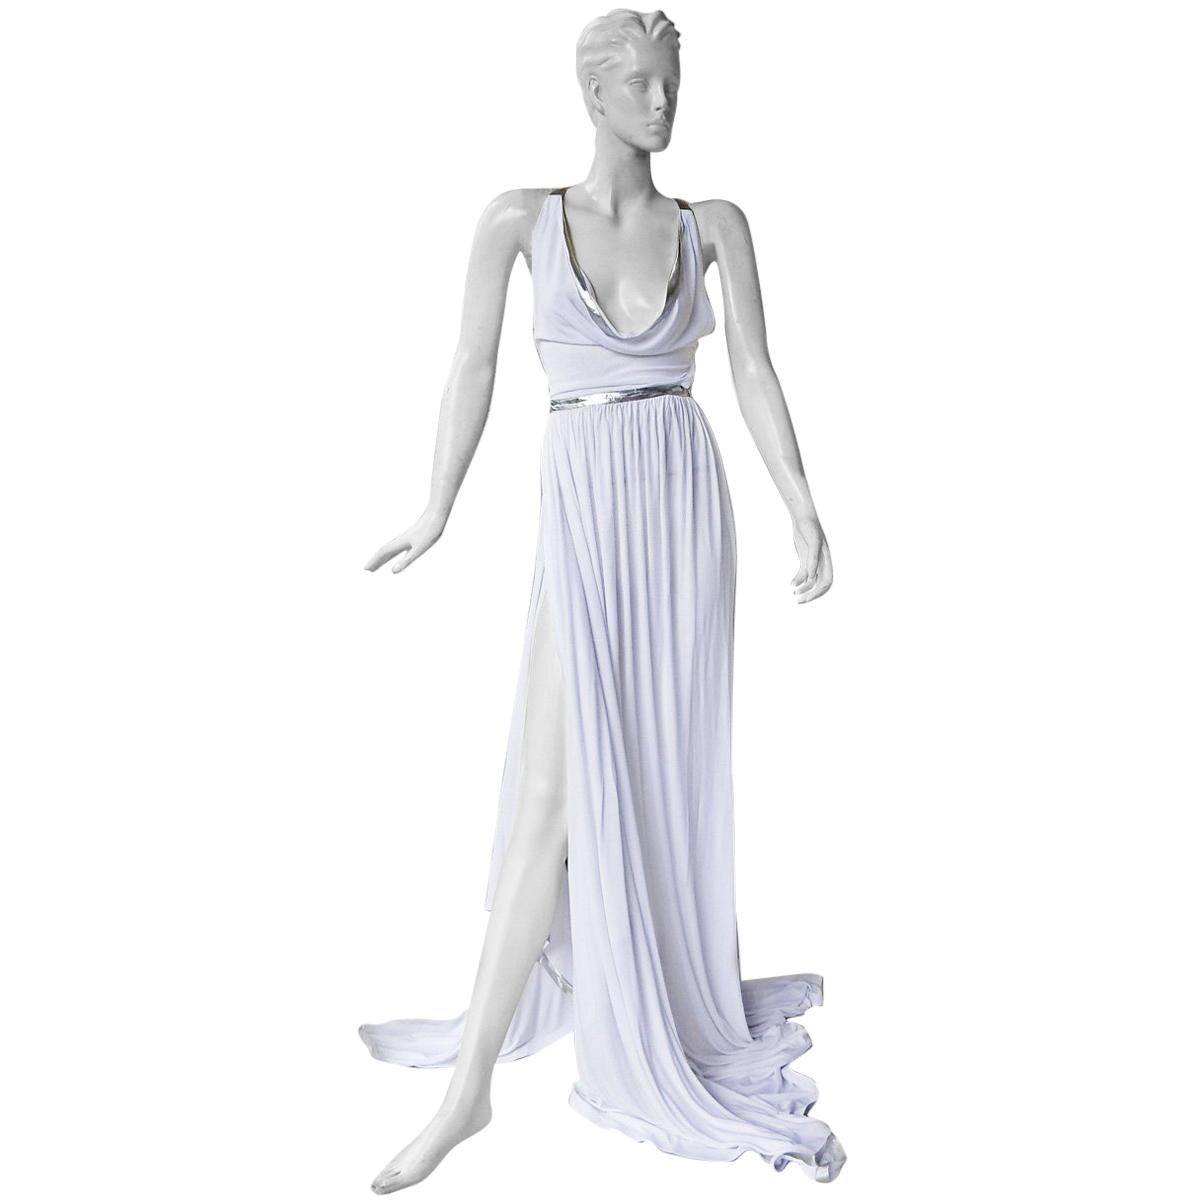 Alaia Vionnet-Inspired Grecian Goddess Dress Gown. New For Sale